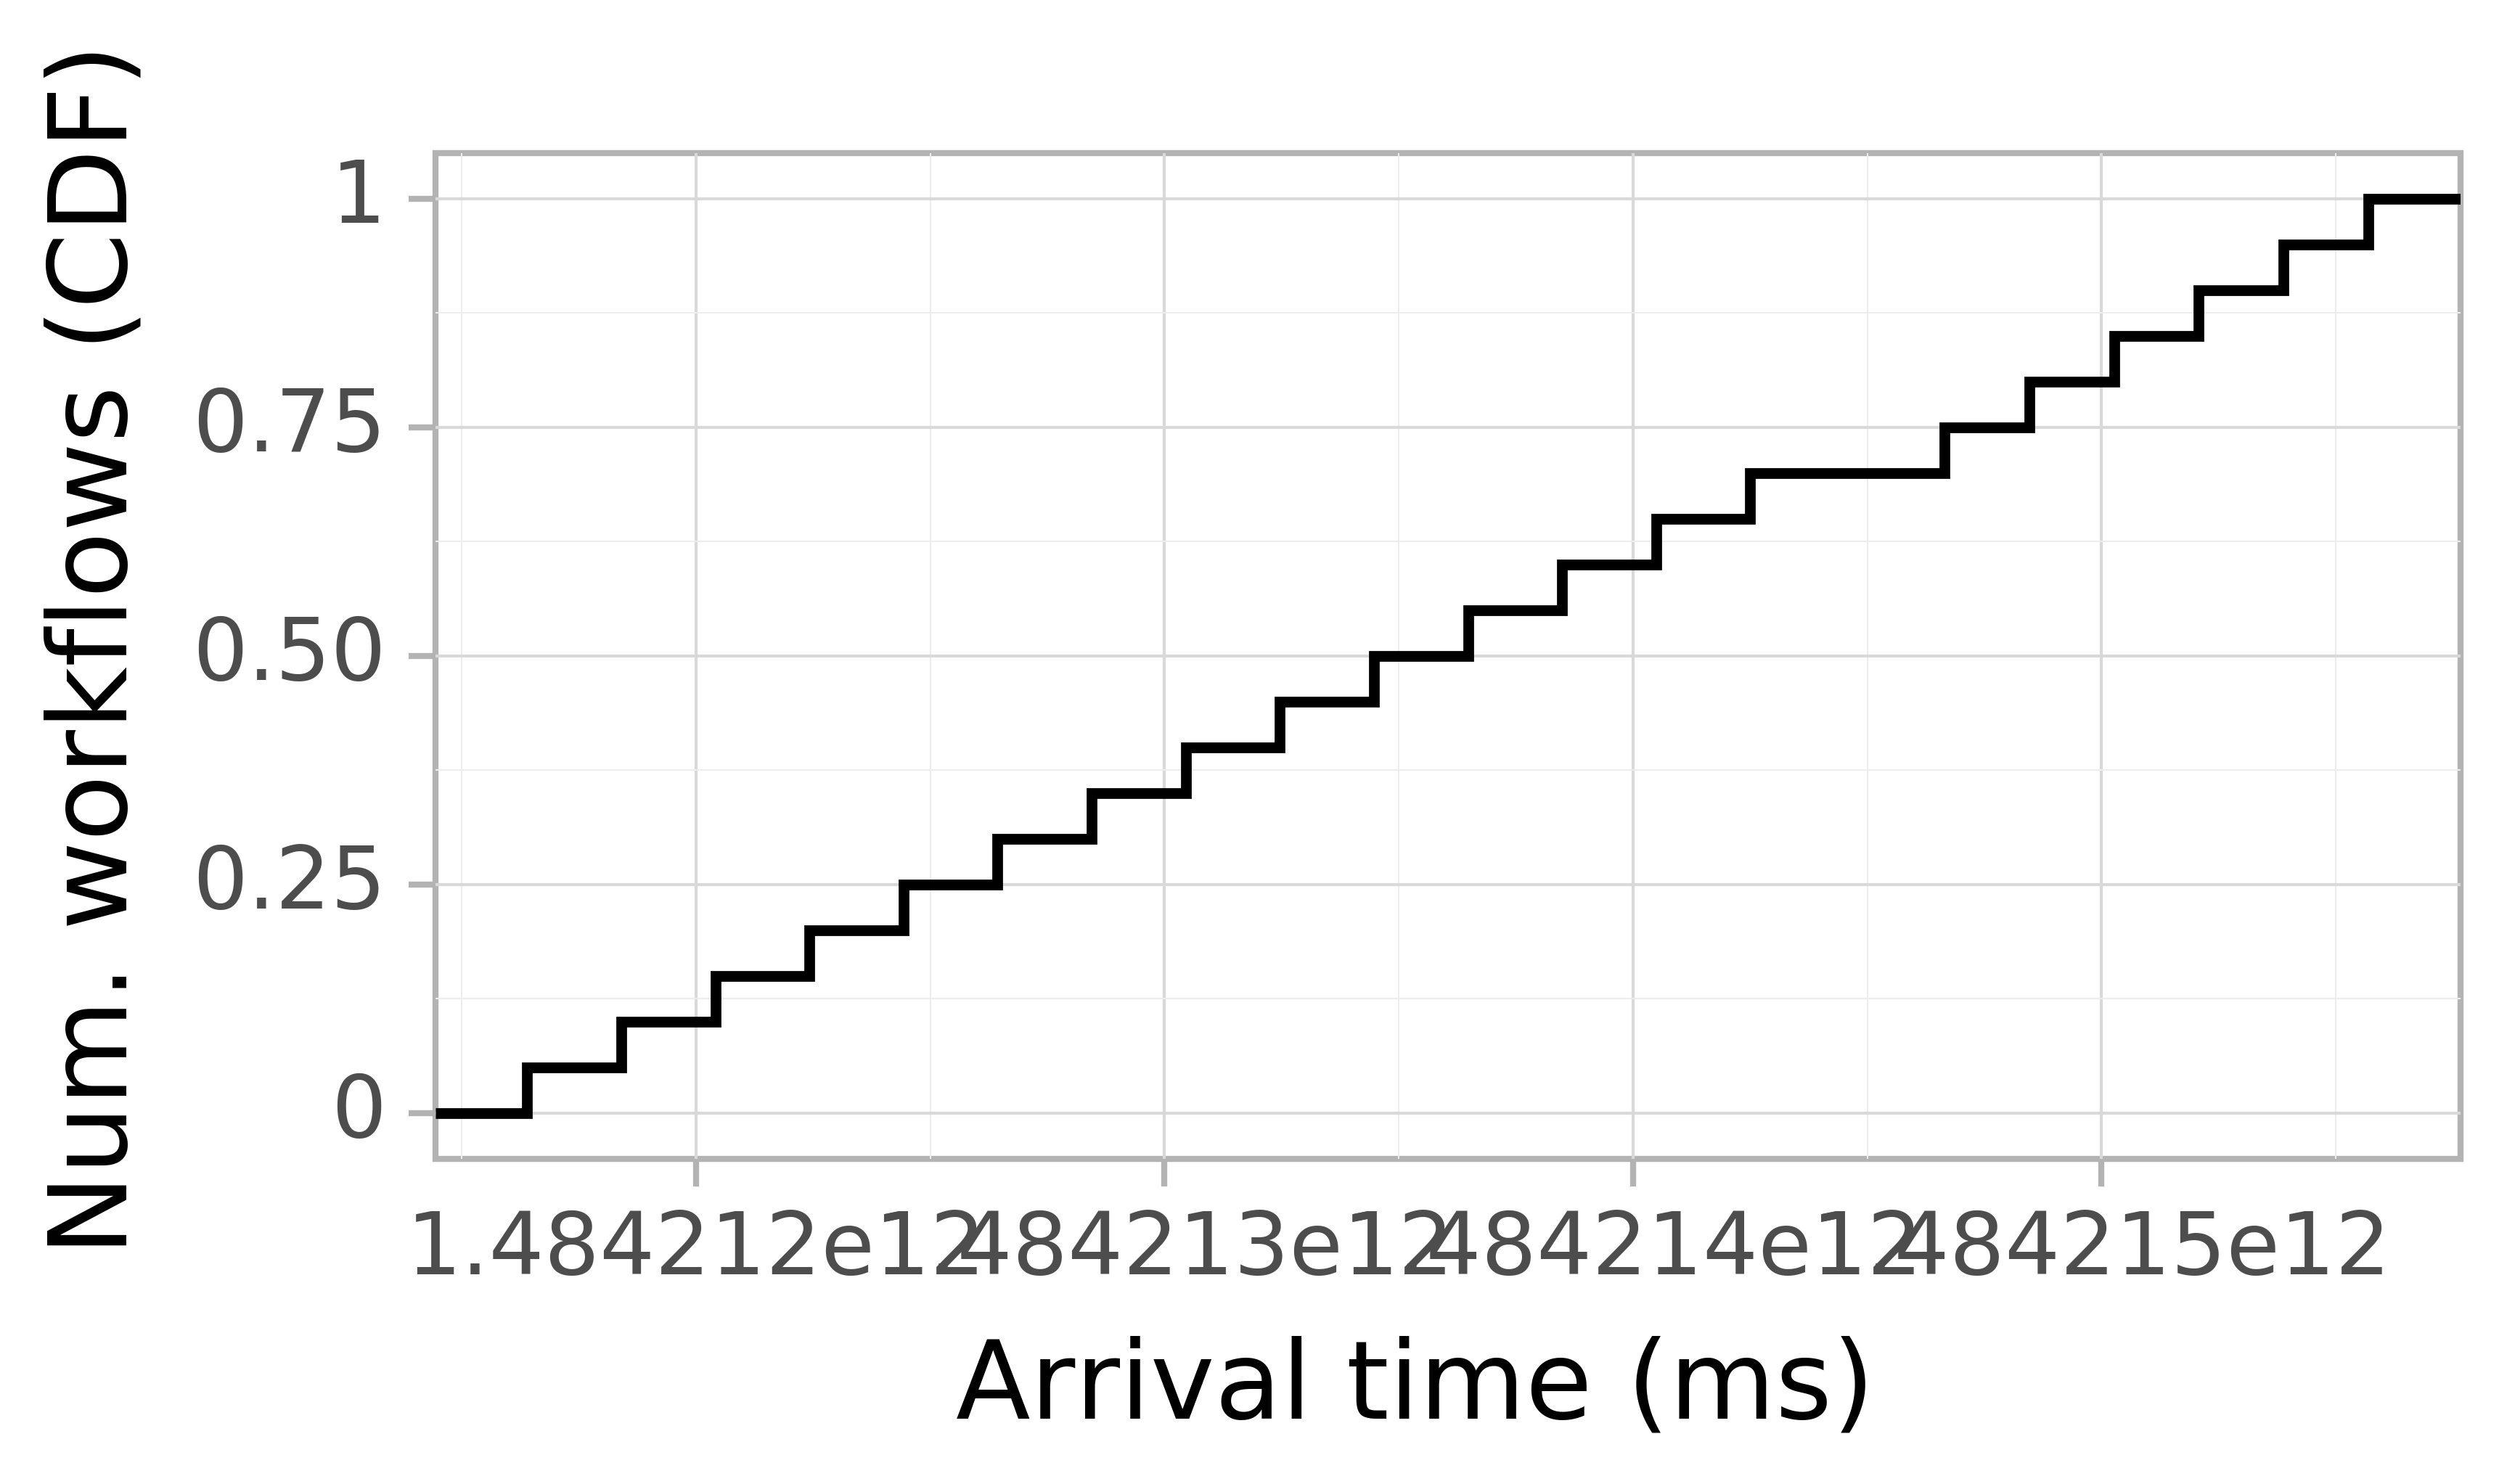 Job arrival CDF graph for the askalon-new_ee9 trace.